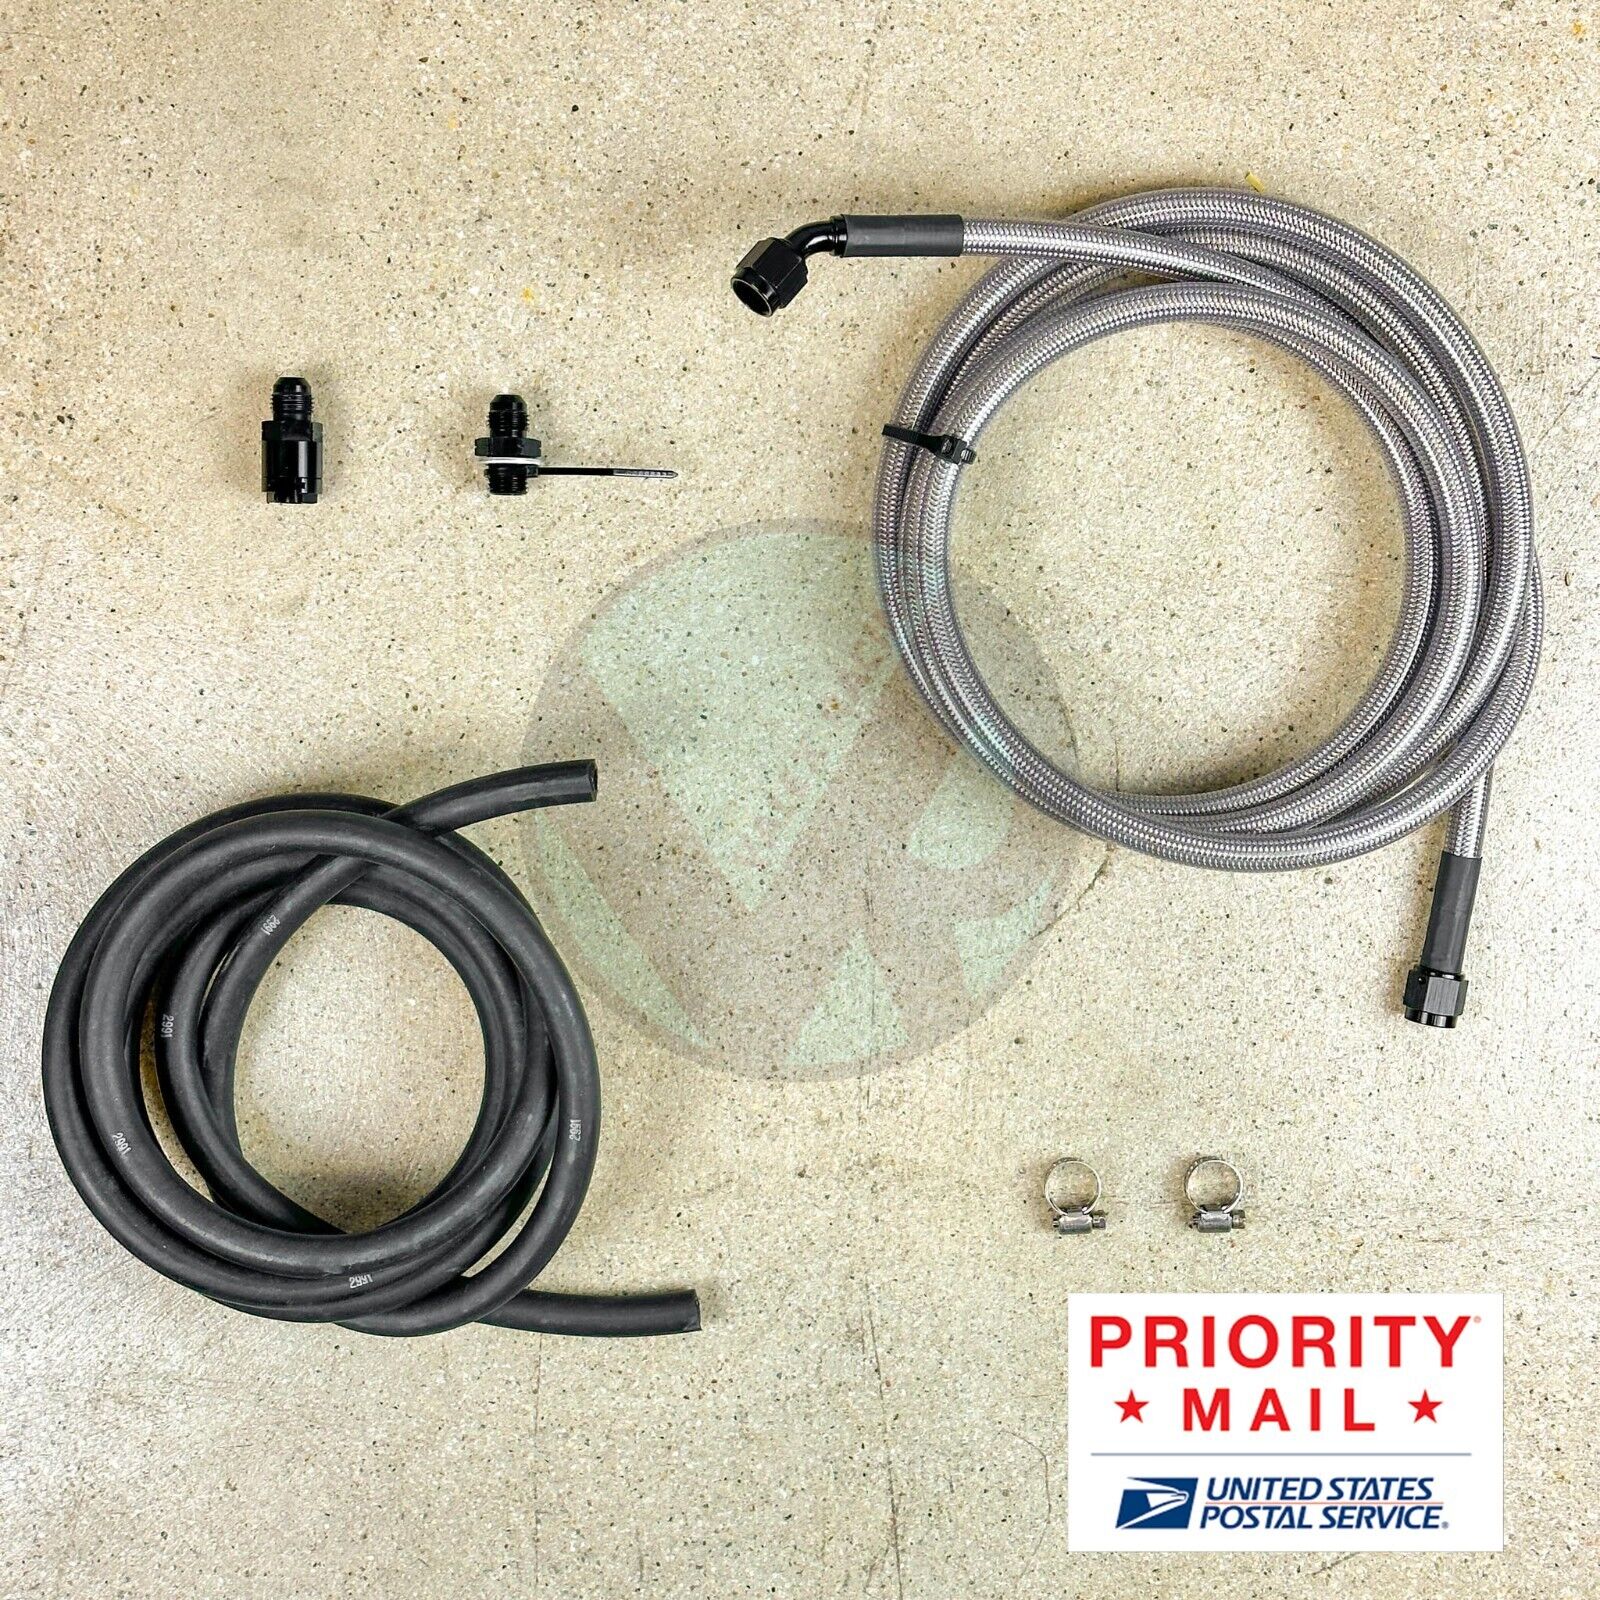 96-00 Civic 4dr Sedan Replacement Stainless Steel Fuel Feed Line & Rubber Return